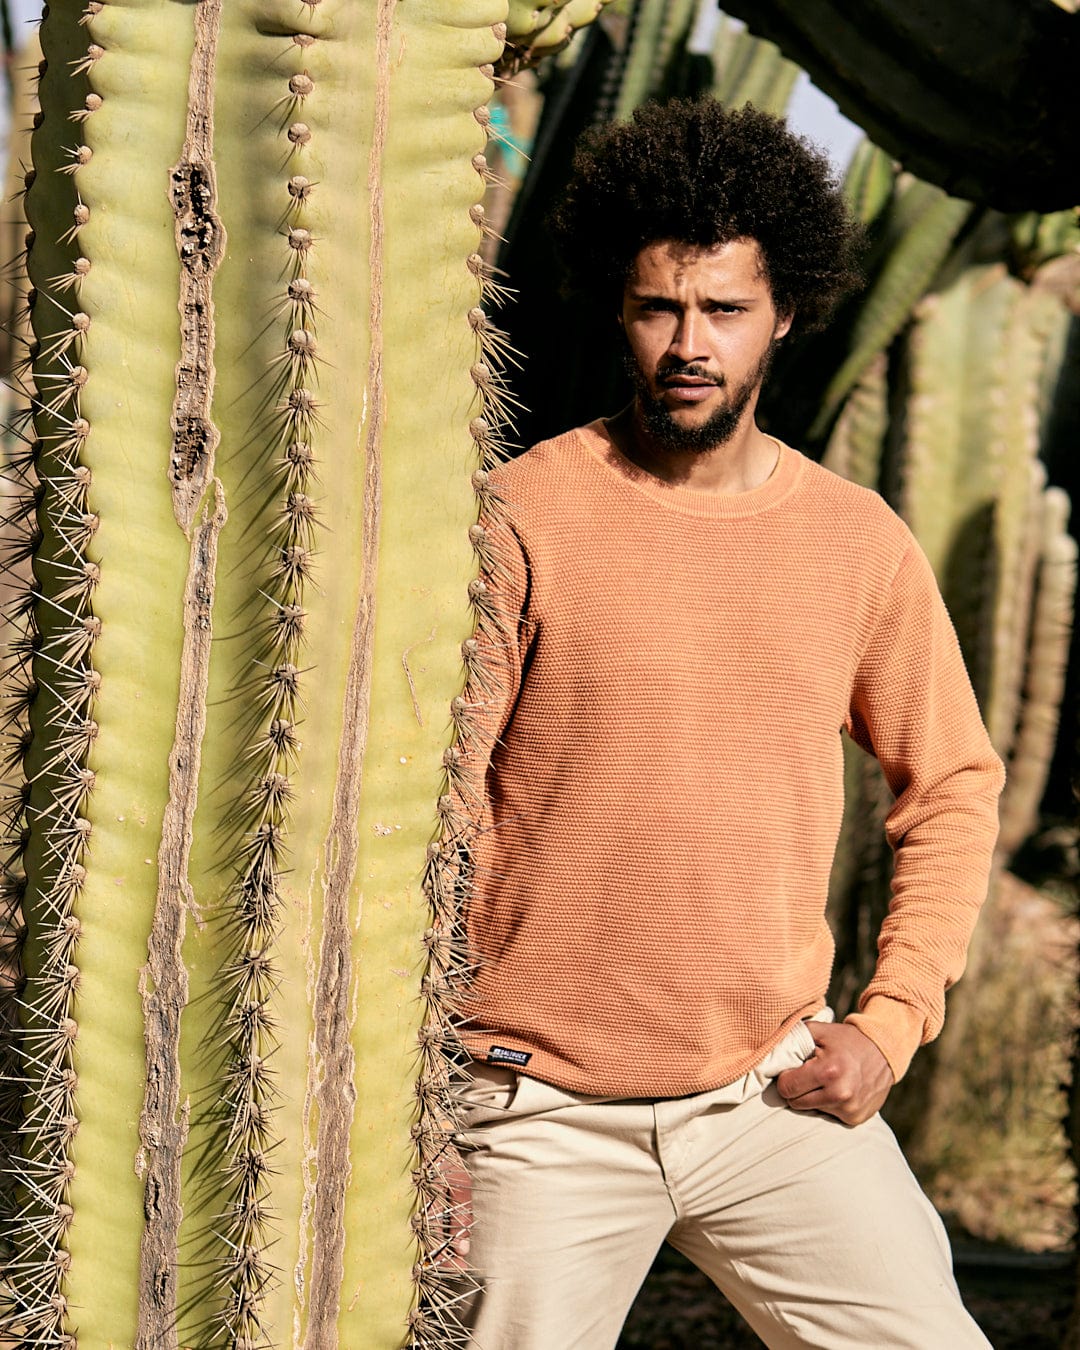 A man with curly hair, dressed in a Saltrock Moss - Mens Washed Knitted Crew - Orange sweater and beige pants, standing beside a tall cactus.